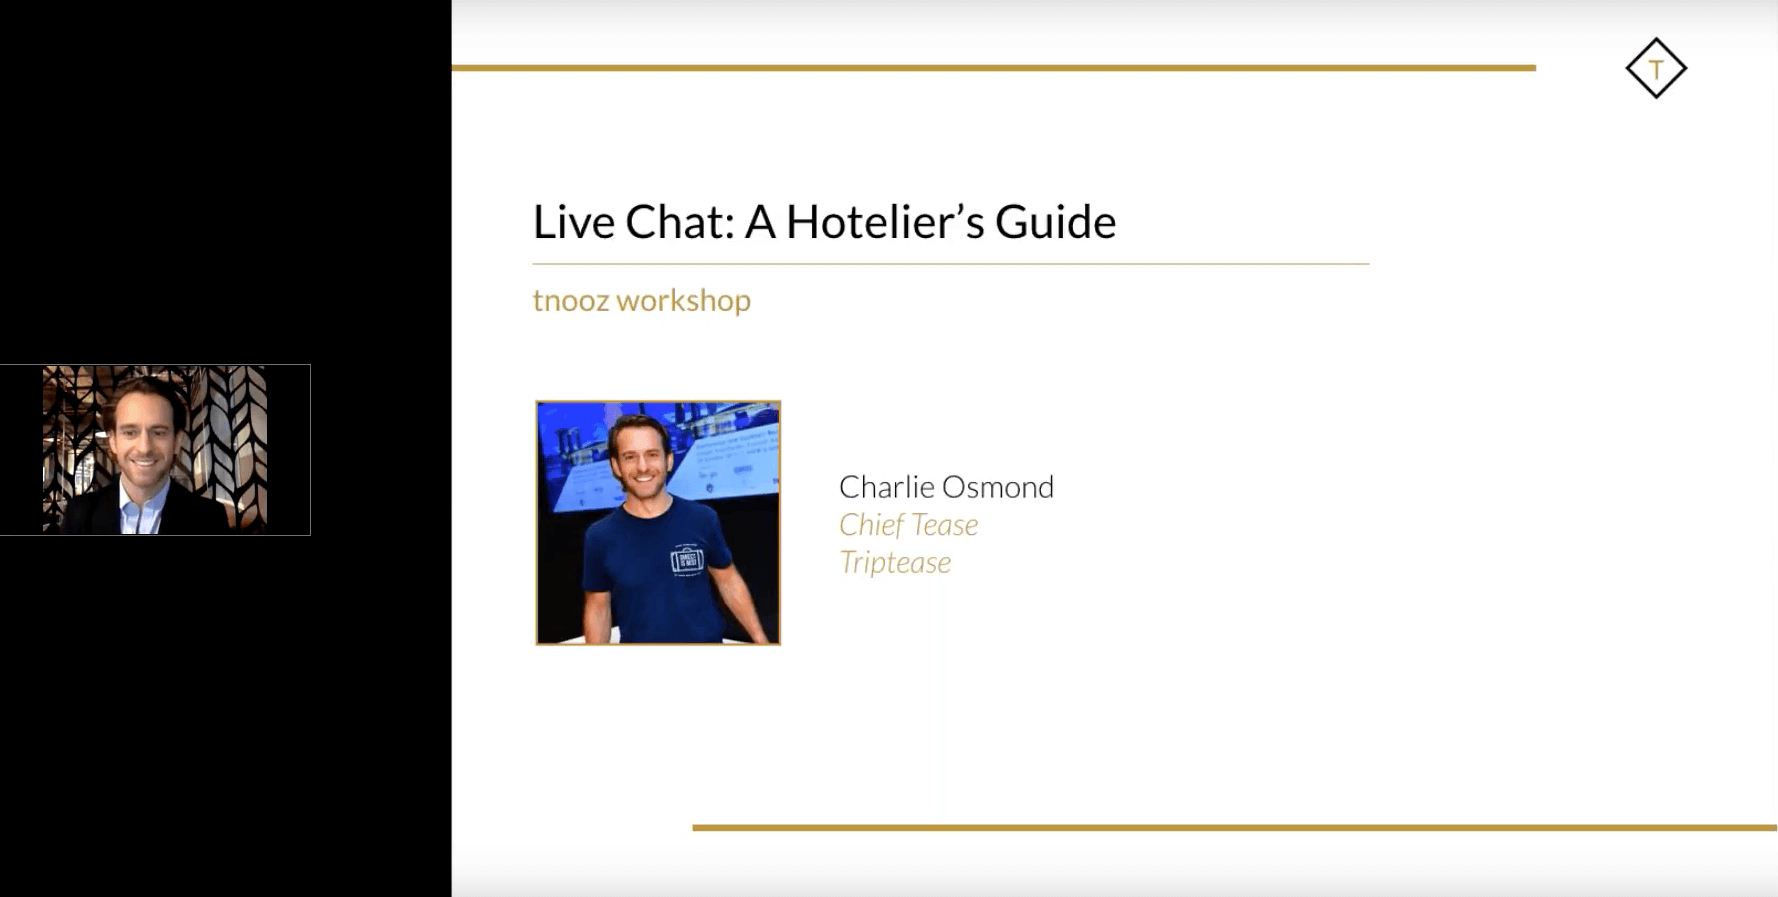 [WATCH] Live Chat: A Hotelier's Guide (tnooz workshop)